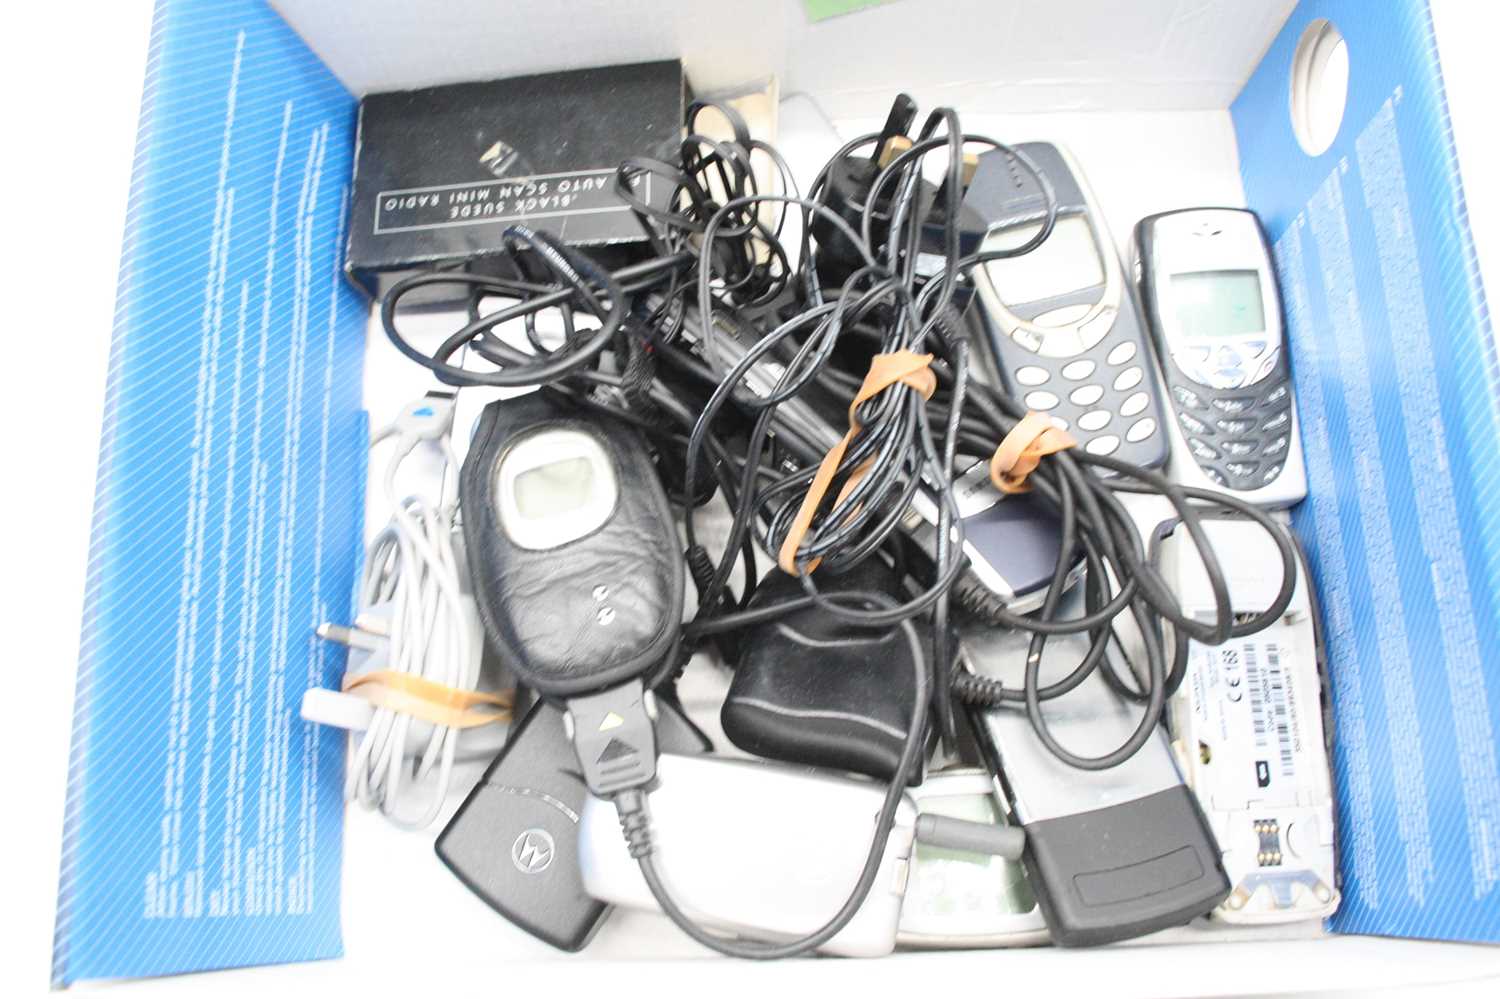 A collection of vintage Nokia mobile phones, together with an IMC Mammoet model jacking system